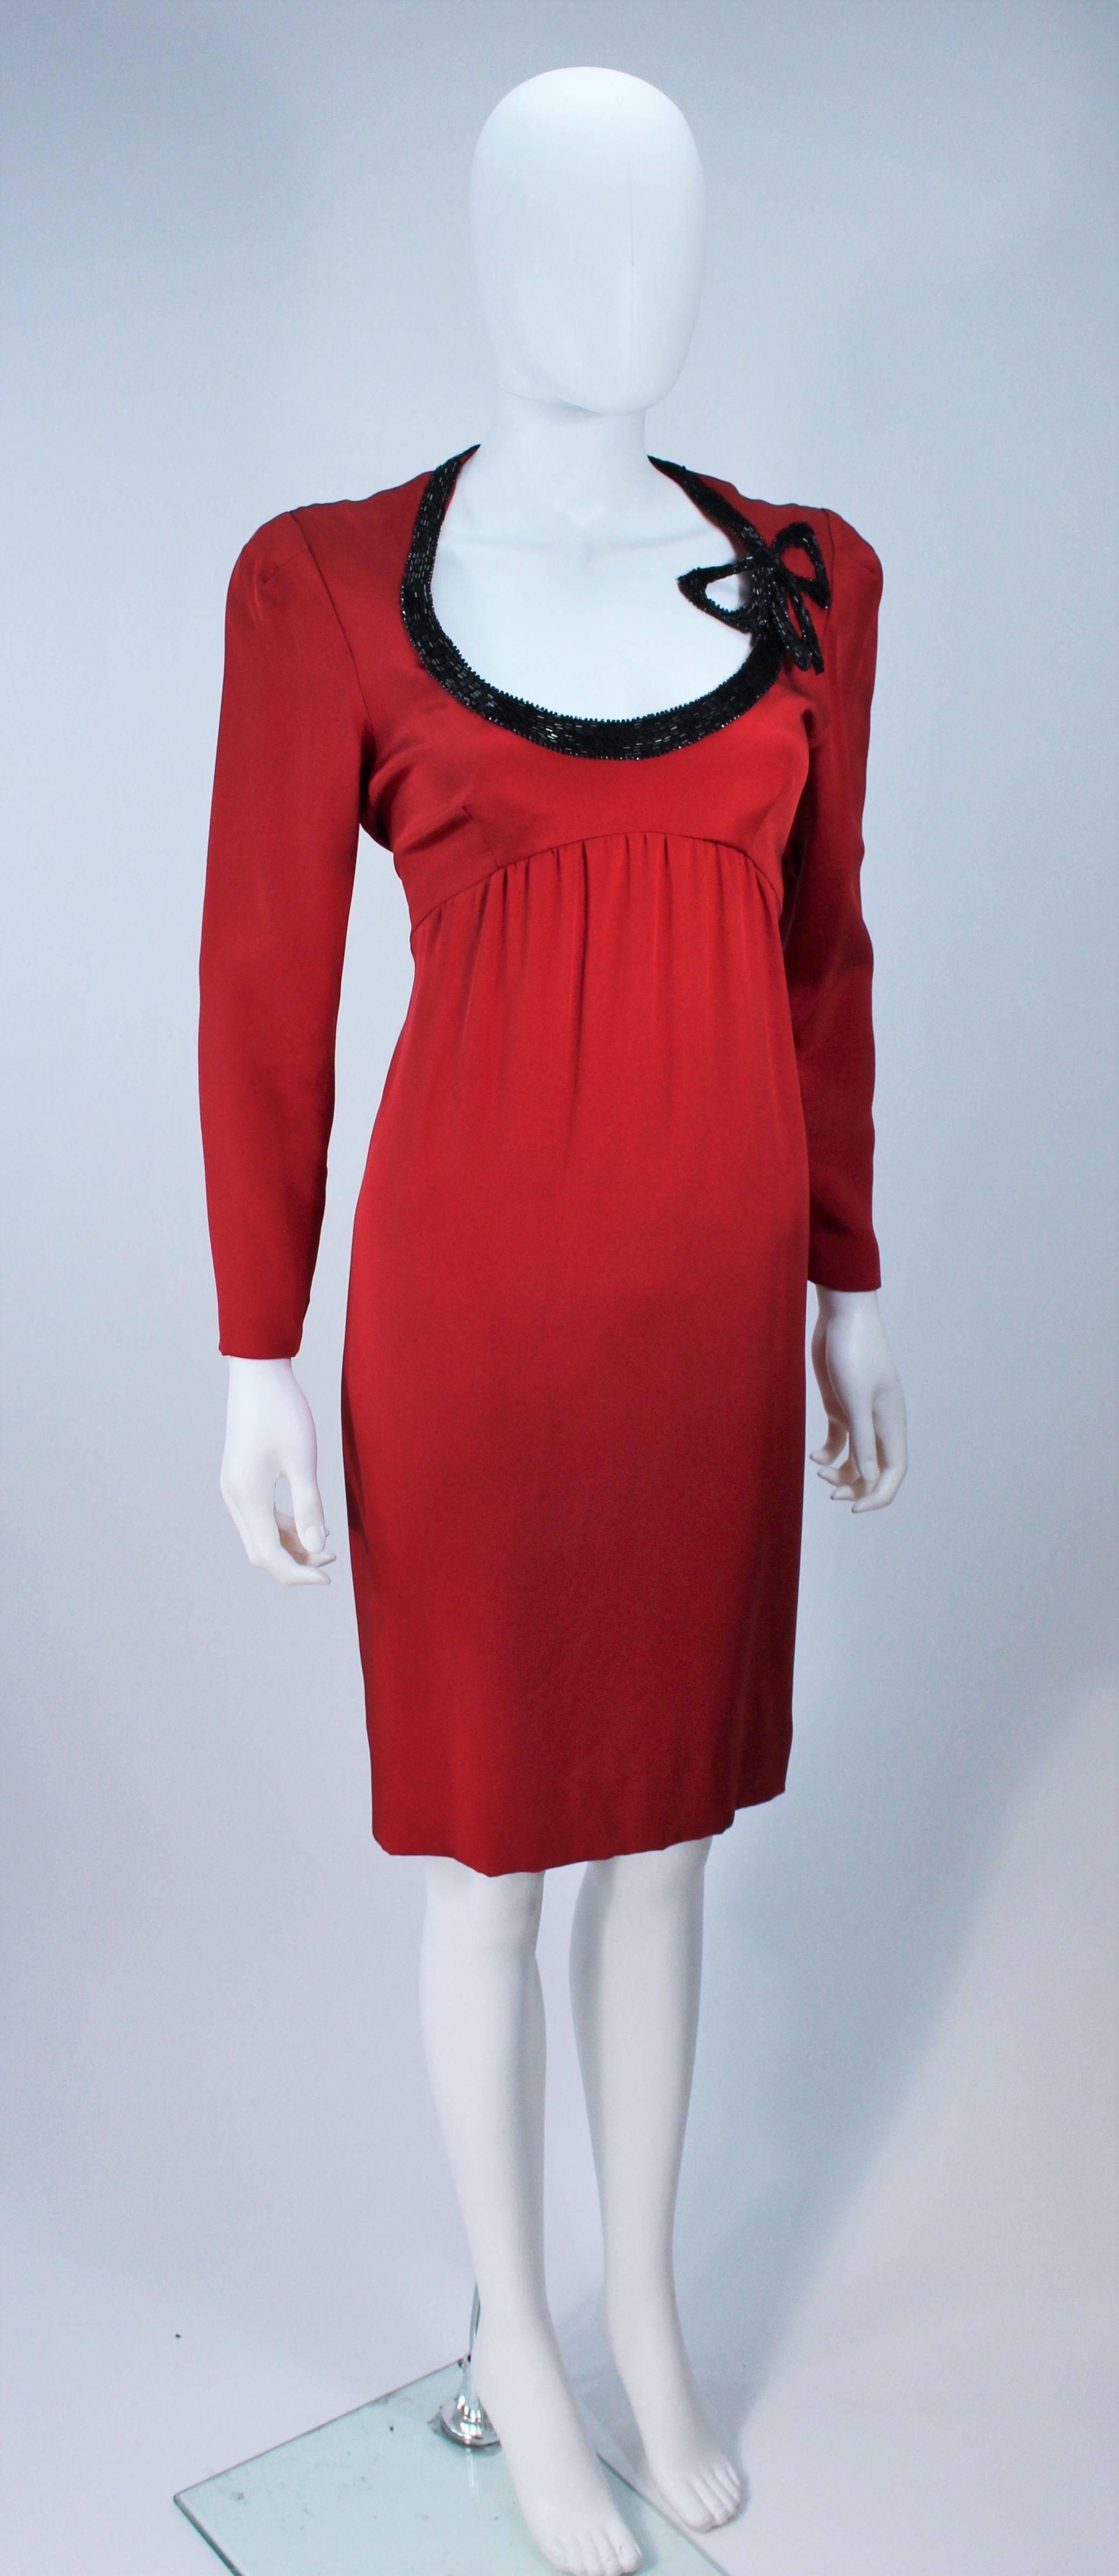 BOB MACKIE Burnished Red Silk Dress with Black Beaded Bow Neckline Size 8 In Excellent Condition For Sale In Los Angeles, CA